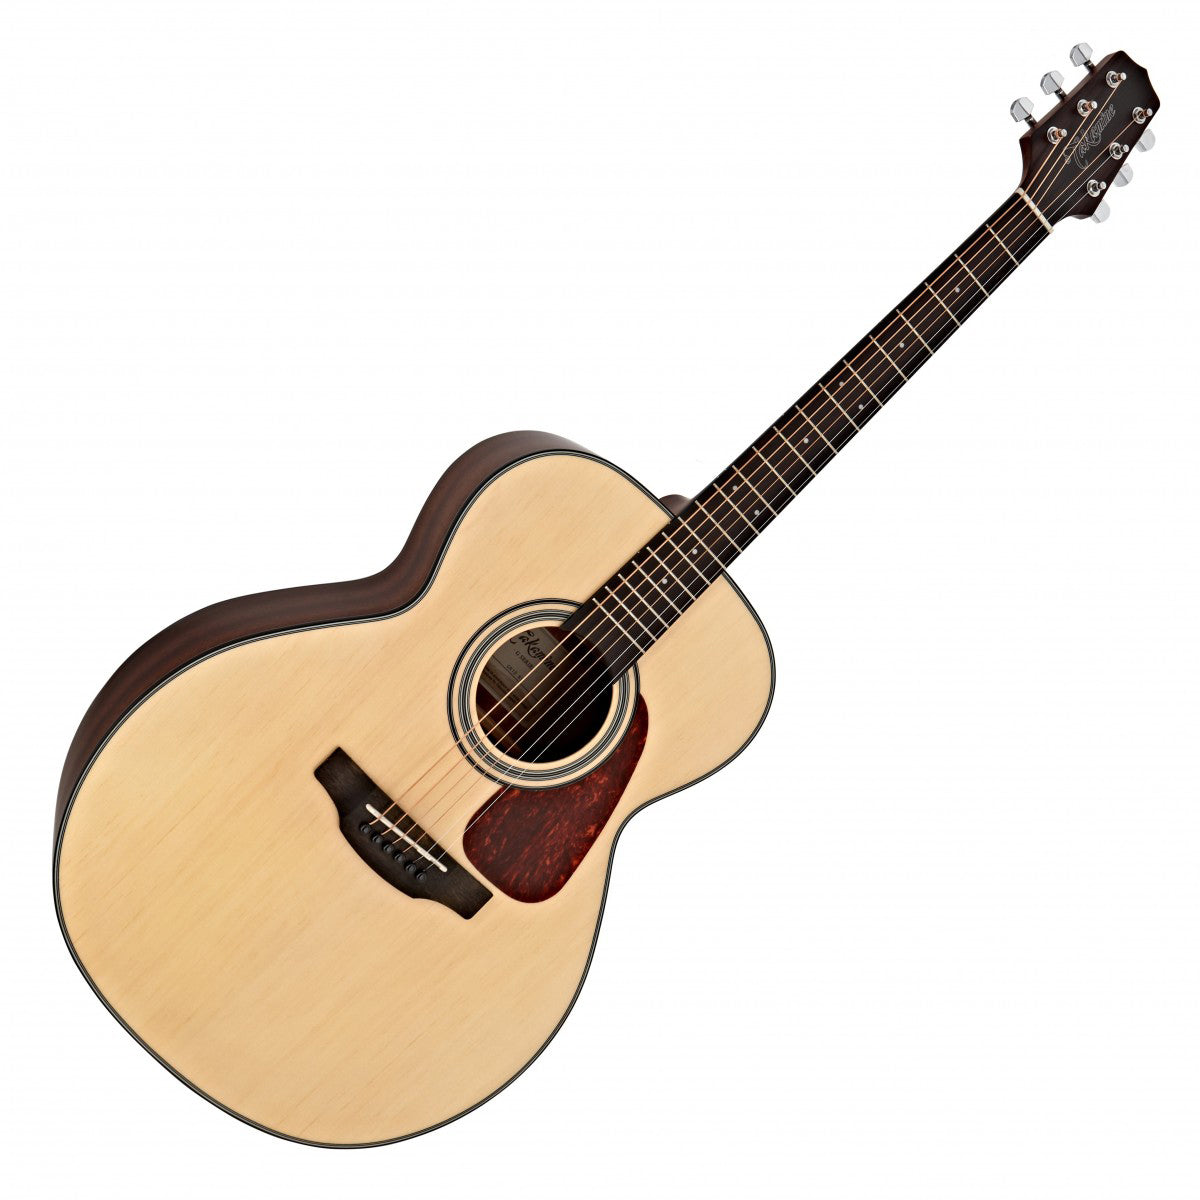 Takamine GN10 Acoustic Guitar